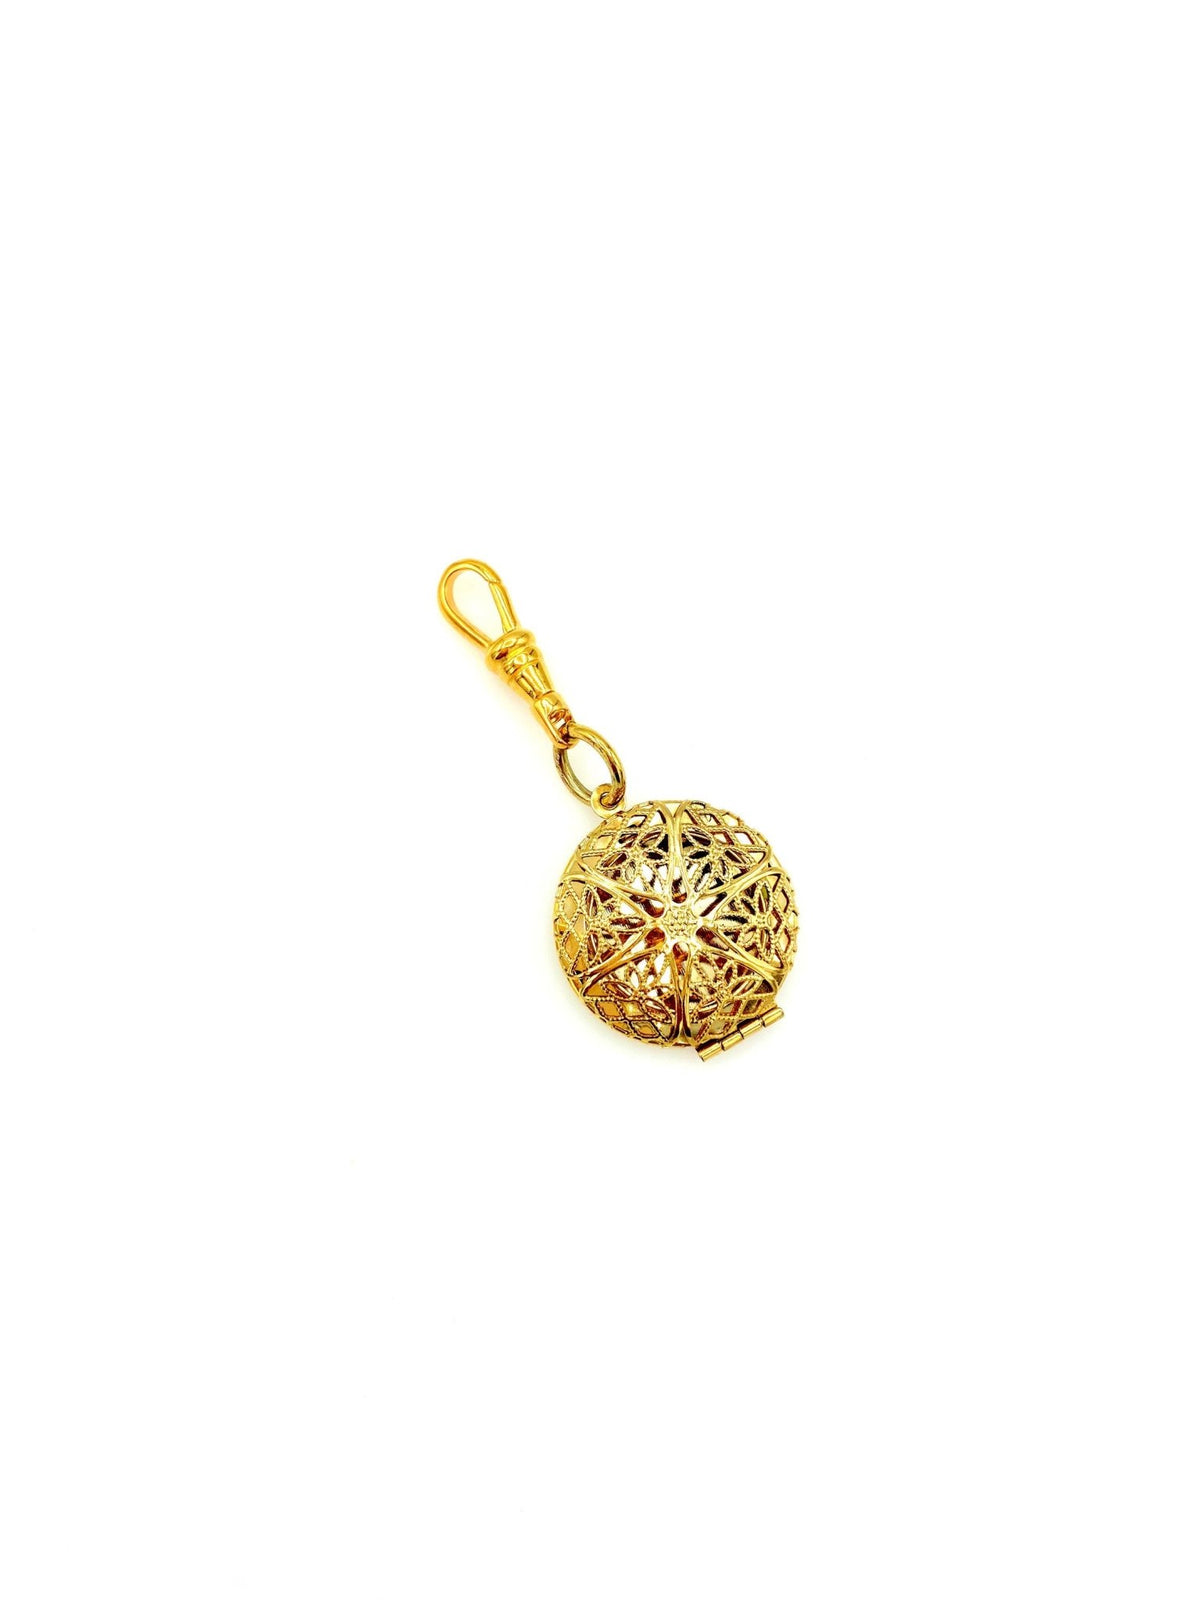 Gold Filigree Victorian Revival Locket Charm - 24 Wishes Vintage Jewelry